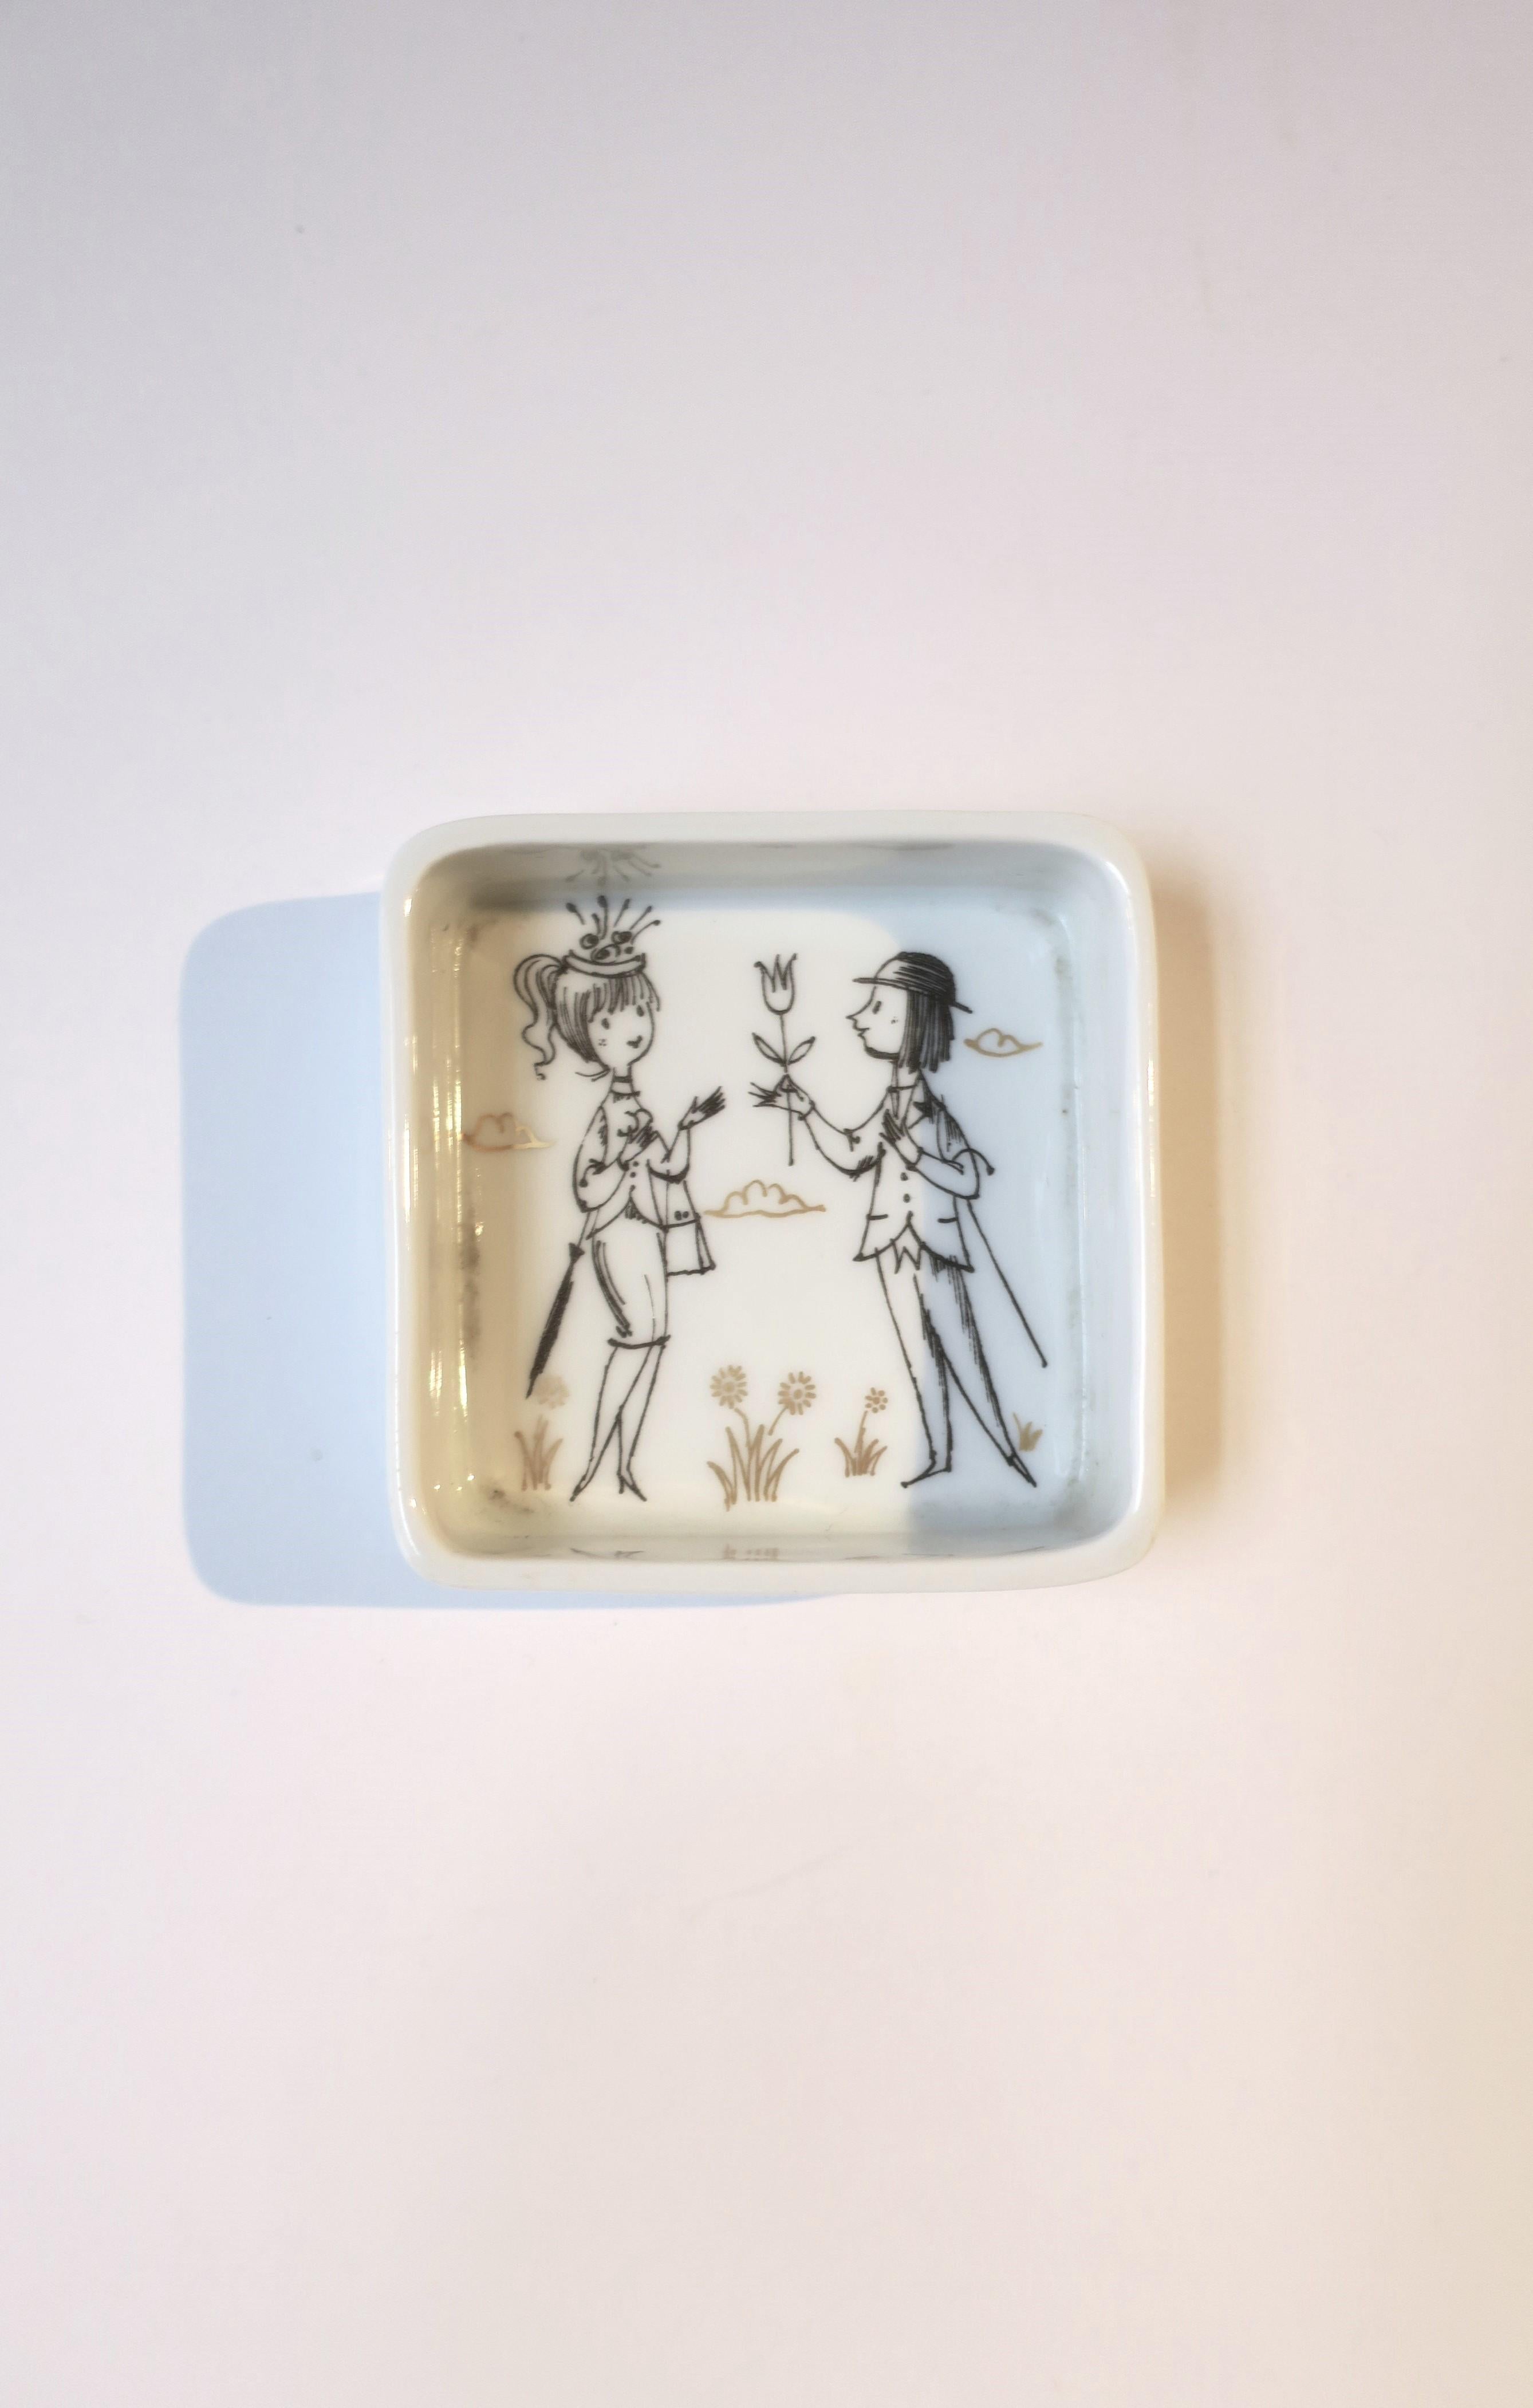 A German white porcelain jewelry dish with whimsical design by designer Raymond Peynet for Rosenthal Studio-Line, Midcentury Modern period, circa mid-20th century, Germany. Dish shows two people, beautifully dressed, perhaps in a park, with the man